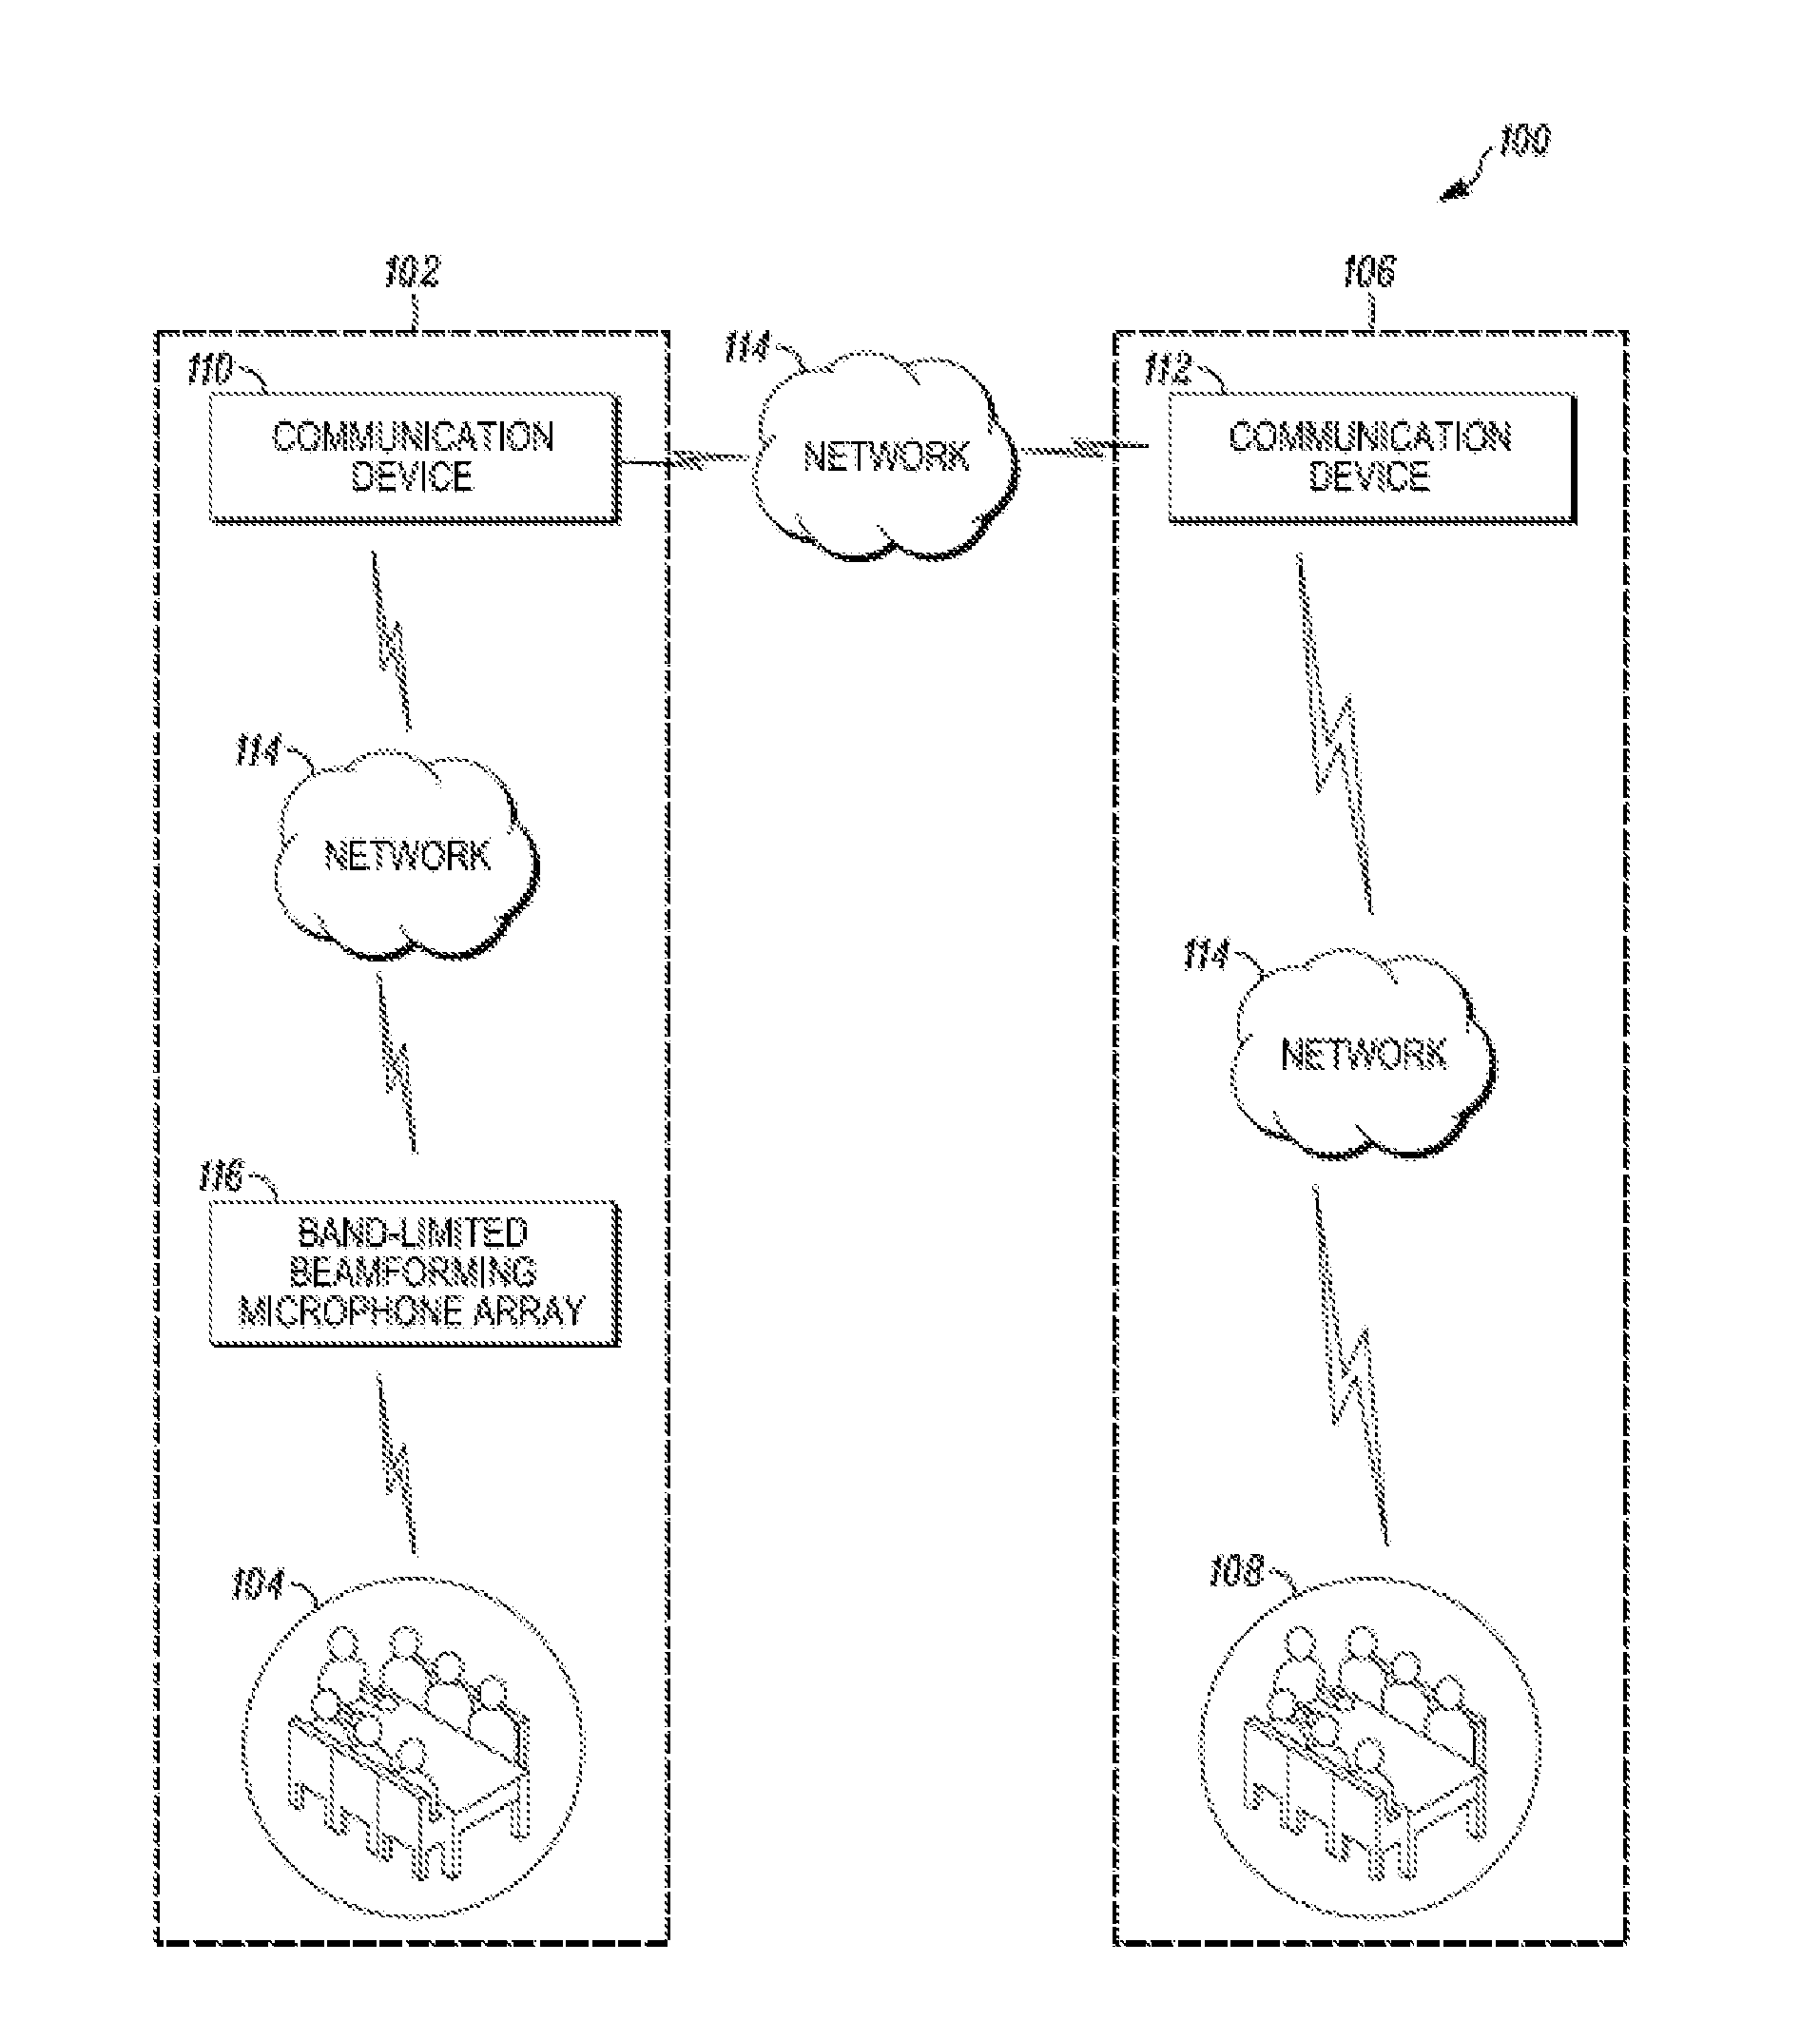 Beamforming Microphone Array with Support for Interior Design Elements